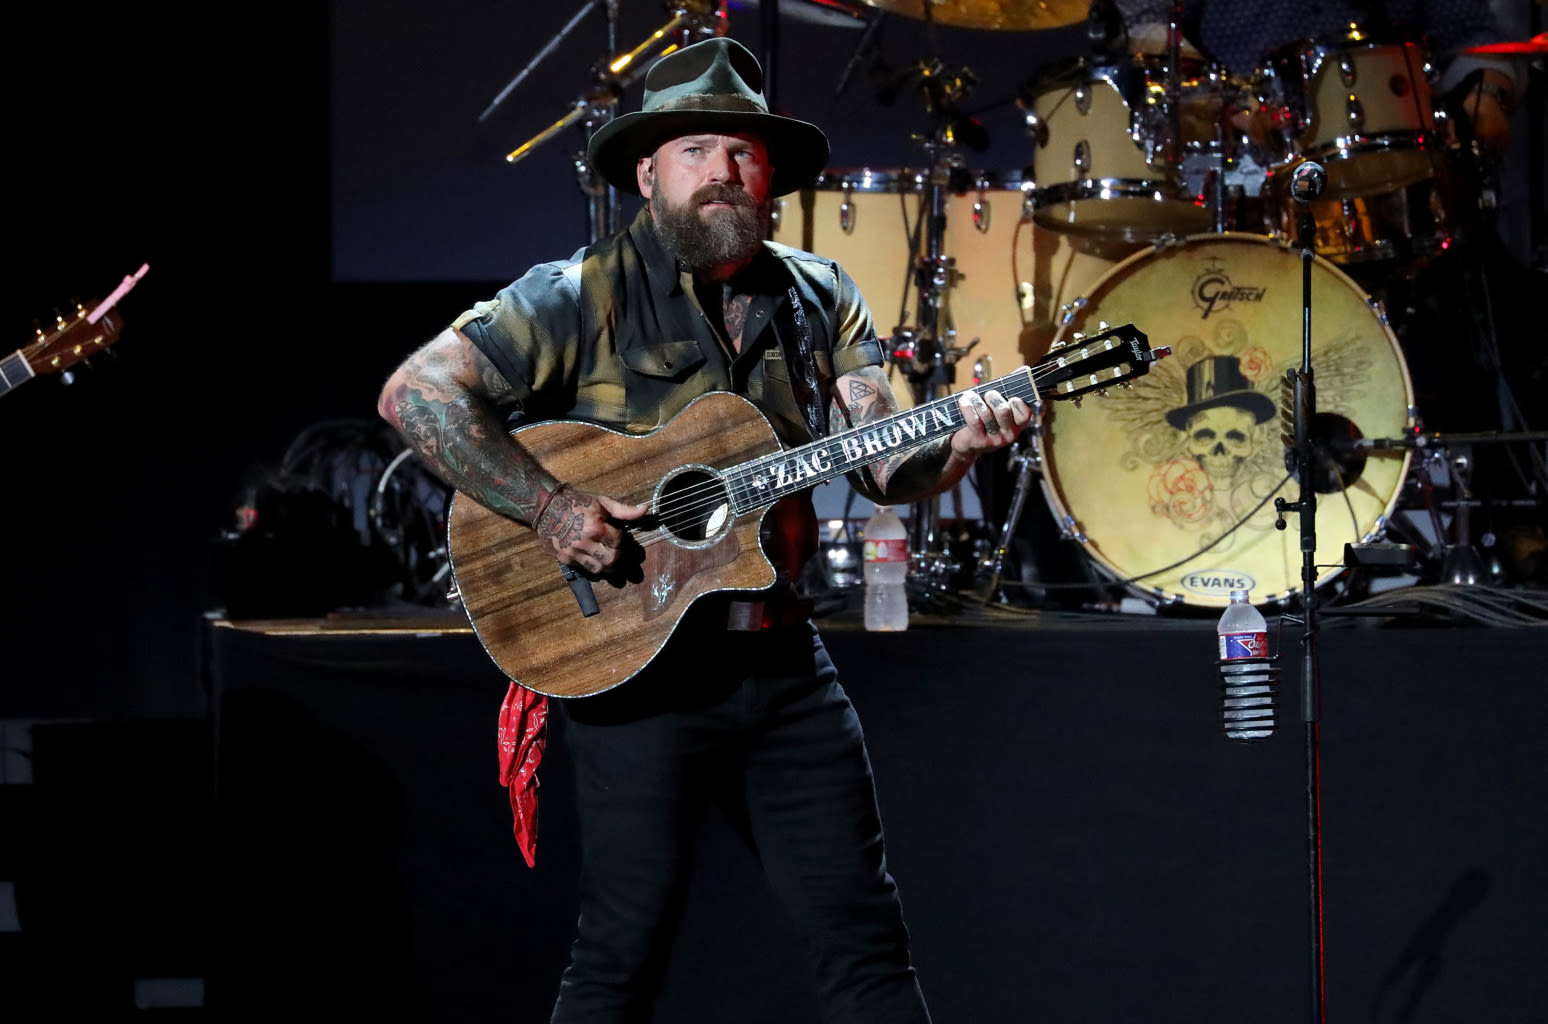 Zac Brown ‘Took the Steps Necessary’ to Protect Family With Kelly Yazdi Lawsuit, Singer Says